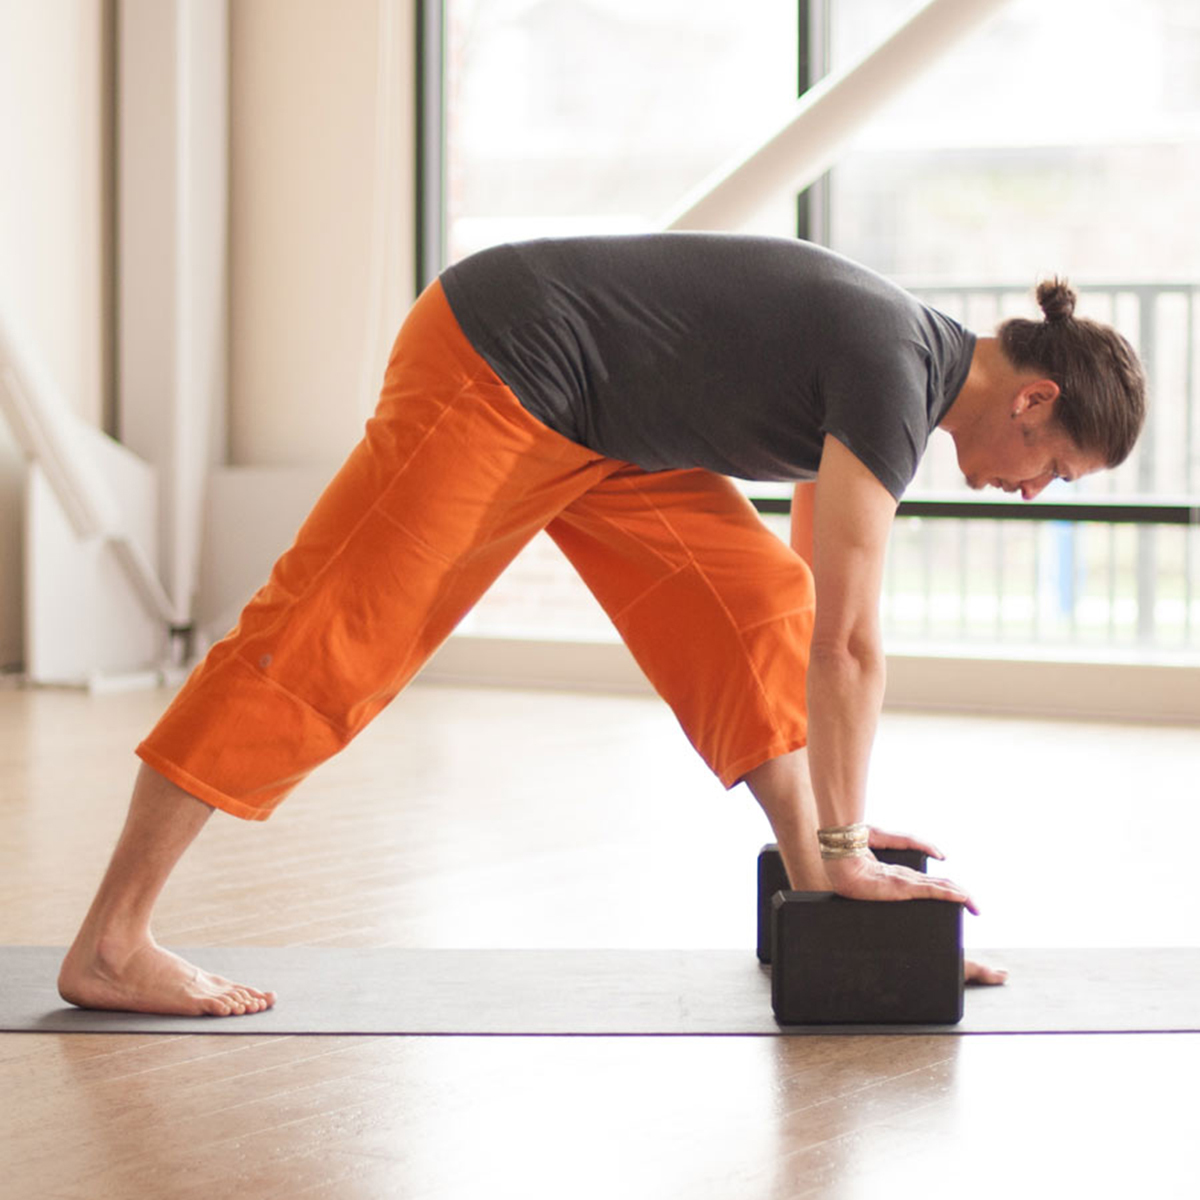 How to Choose the Best Yoga Blocks